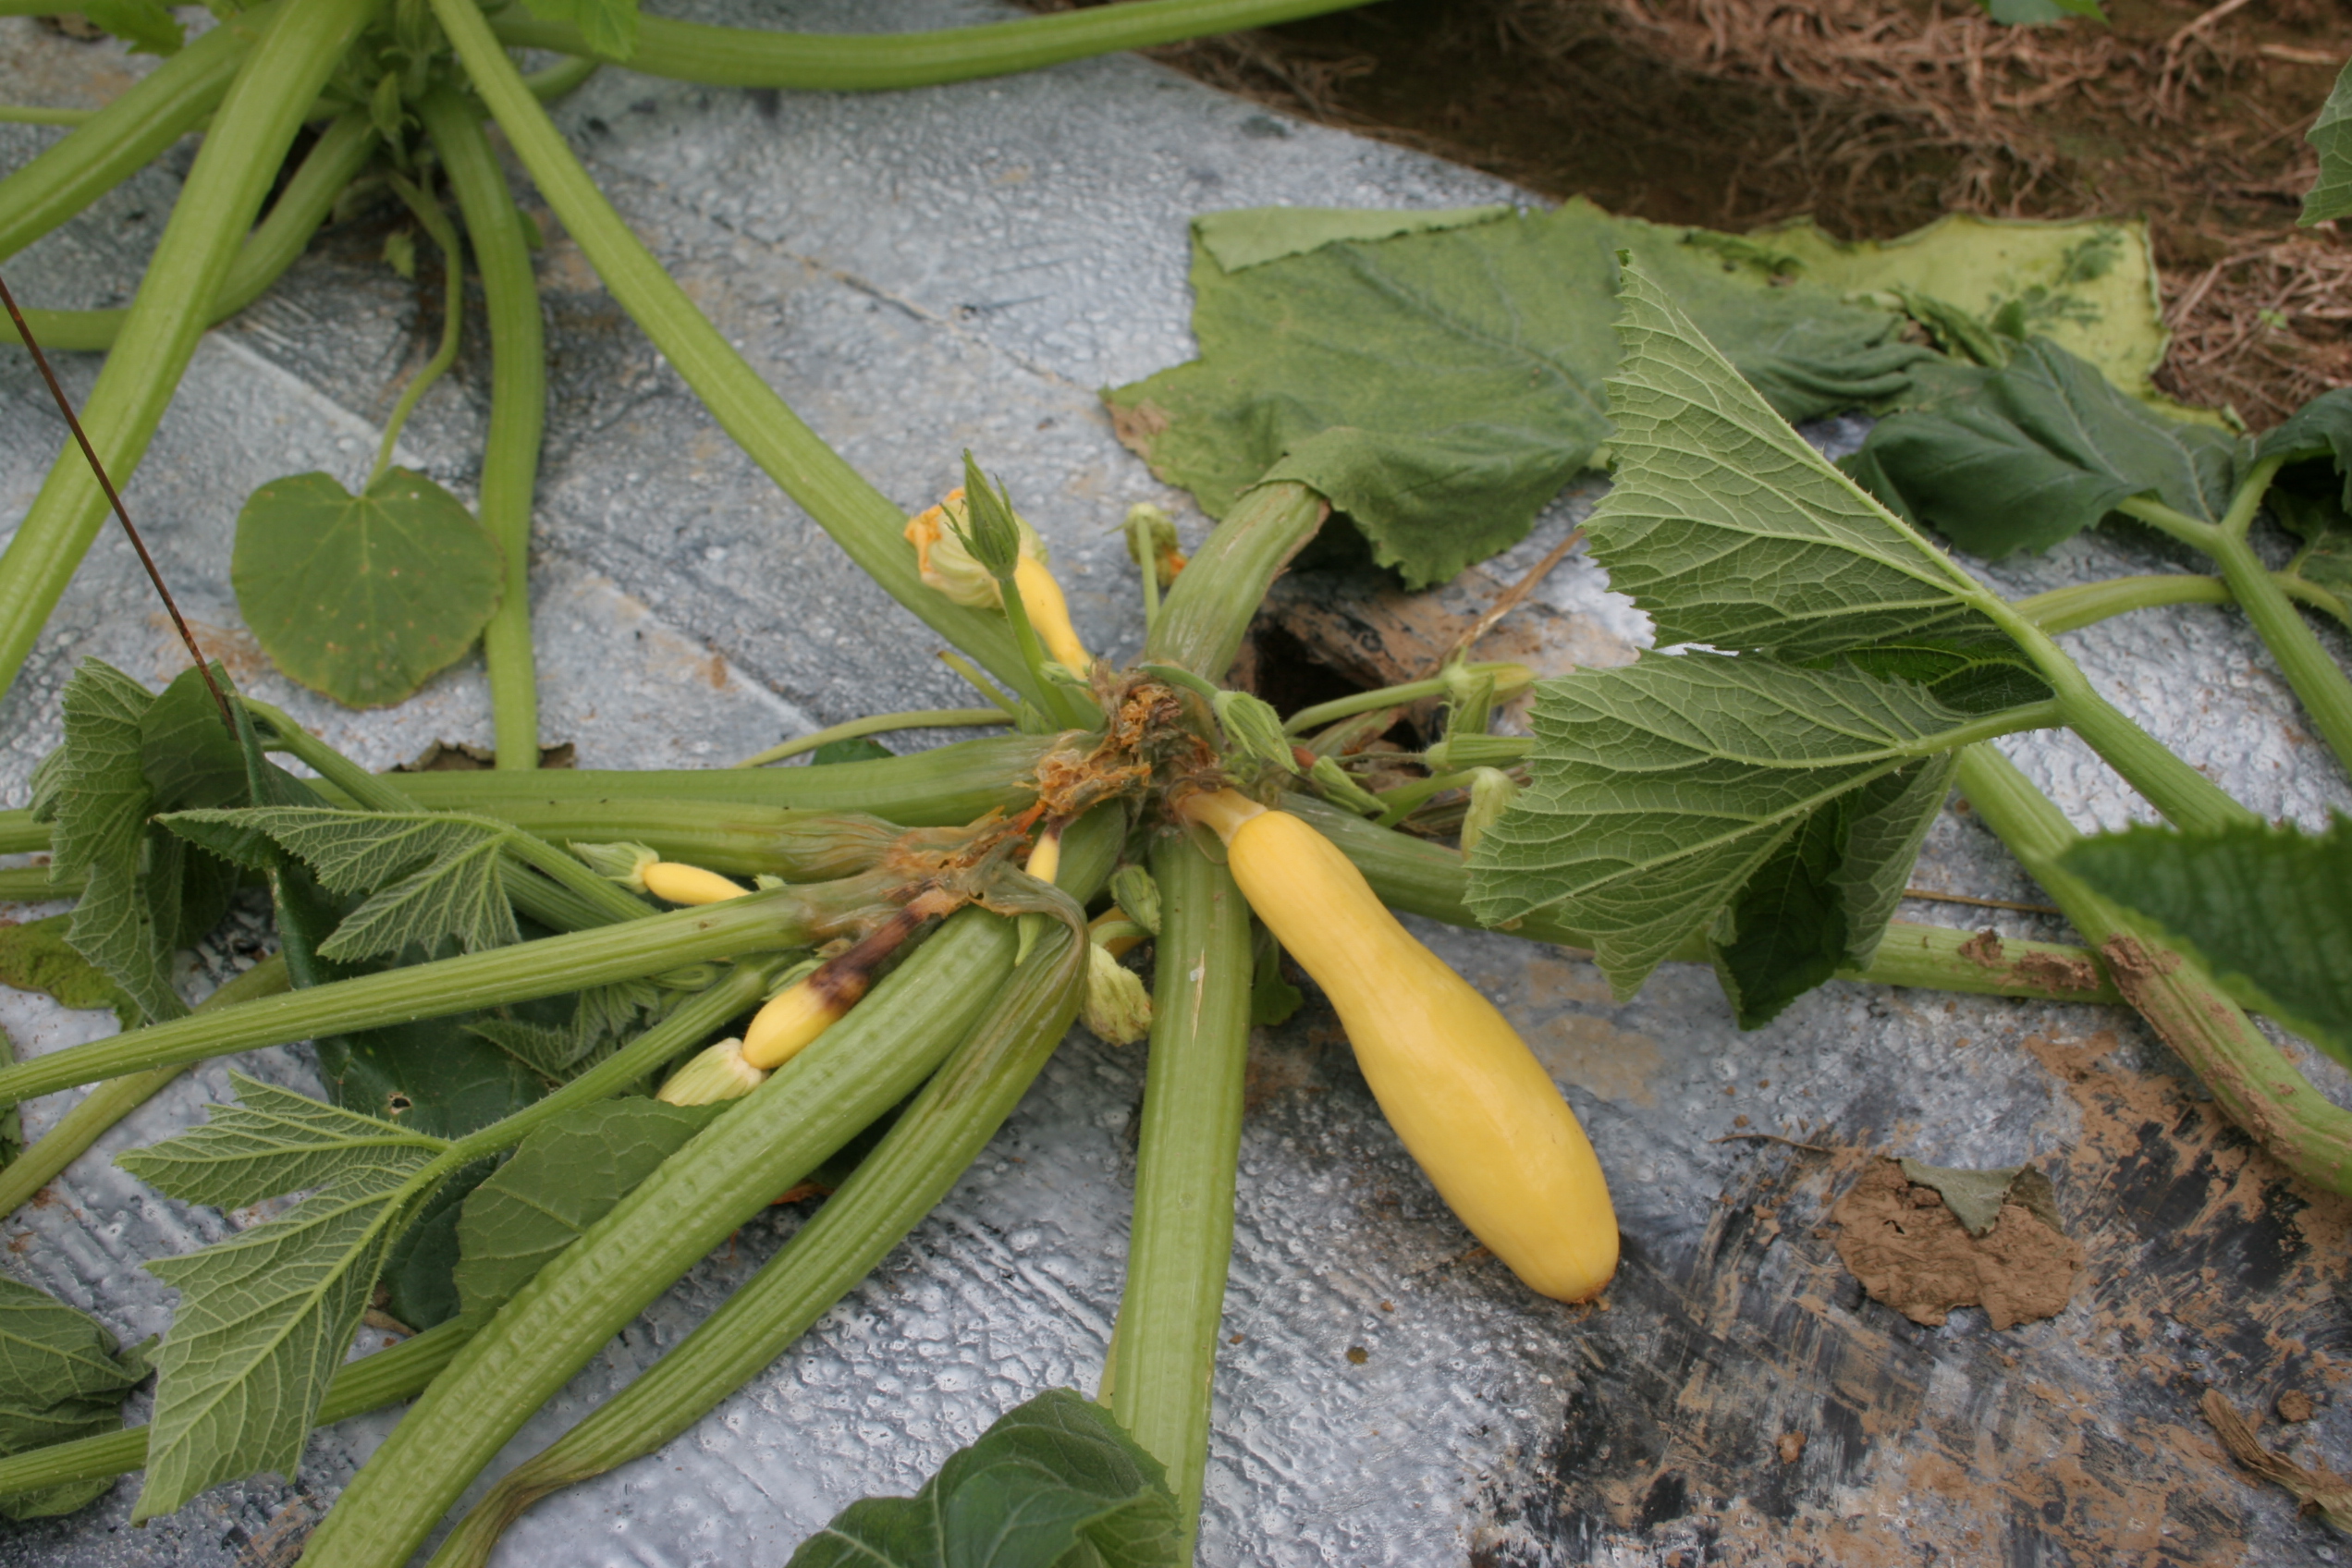 Phytophthora blight crown rot on yellow squash.